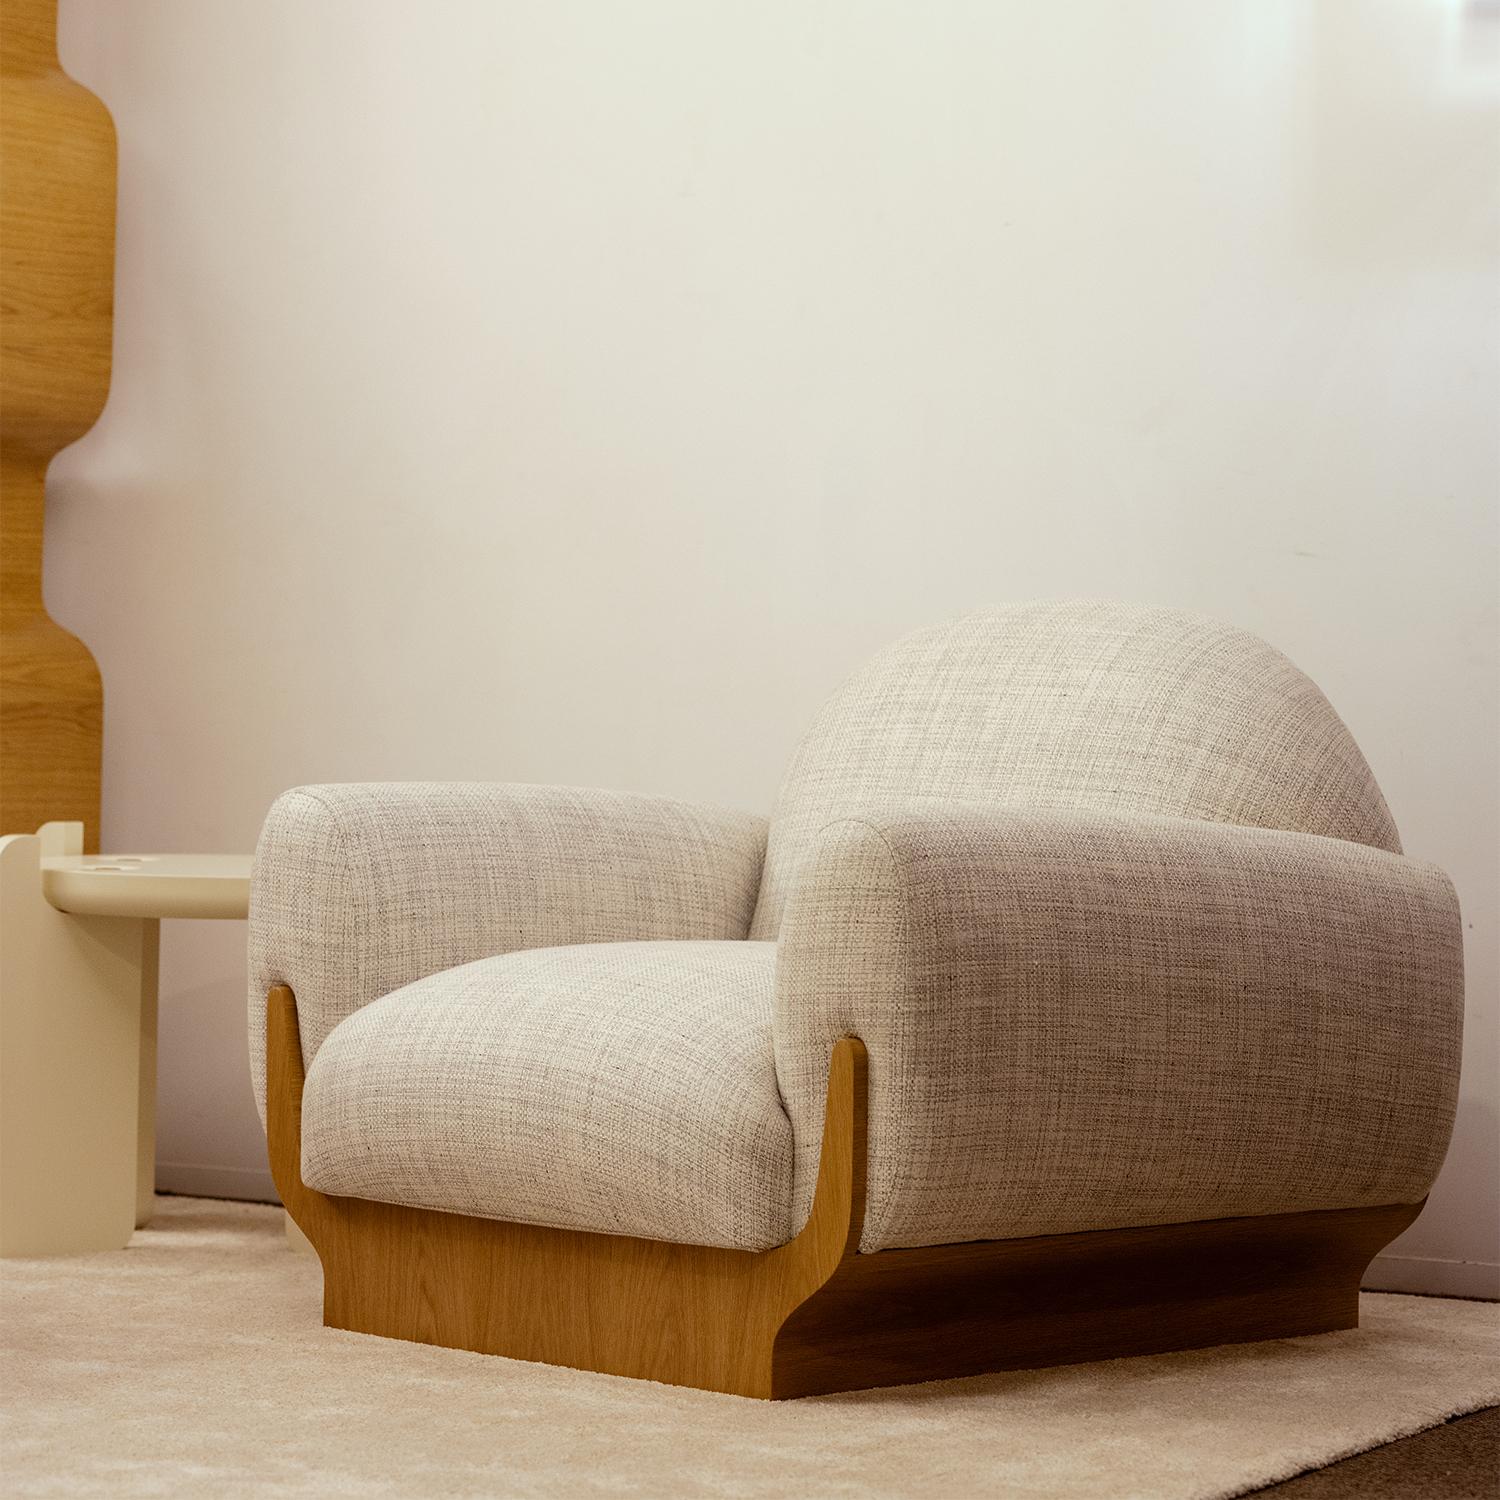 Copacabana Armchair, Natural Oak Base, Handcrafted in Portugal by Duistt

Part of Copacabana collection, the Copacabana armchair will reinforce the balance and appealing sense of liveability, warmth and modernity with a design concept that combines